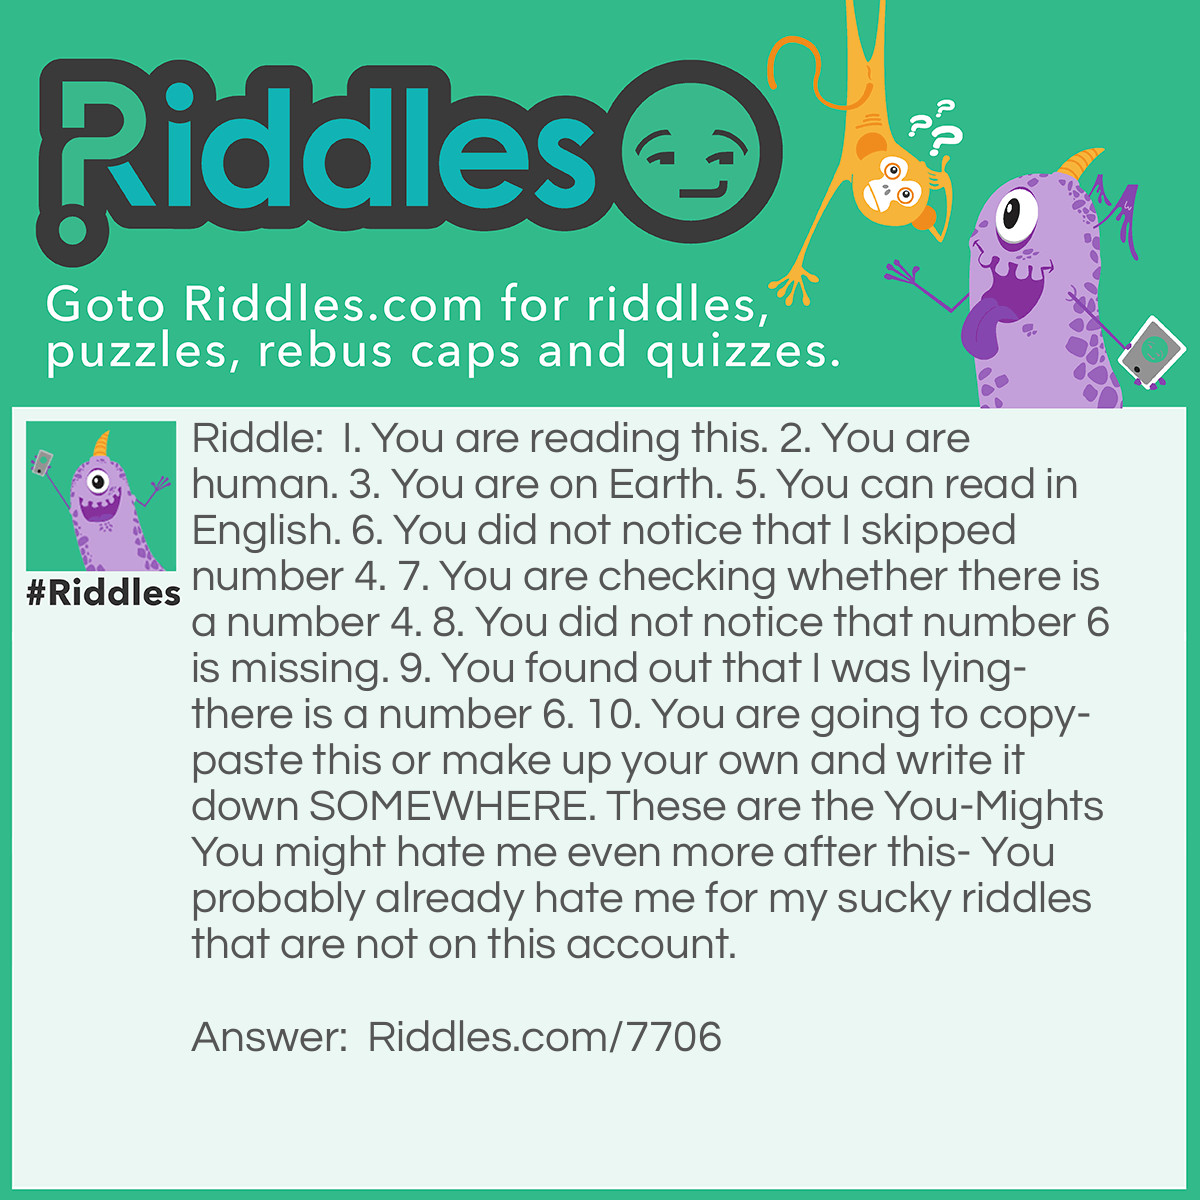 Riddle: I. You are reading this. 2. You are human. 3. You are on Earth. 5. You can read in English. 6. You did not notice that I skipped number 4. 7. You are checking whether there is a number 4. 8. You did not notice that number 6 is missing. 9. You found out that I was lying- there is a number 6. 10. You are going to copy-paste this or make up your own and write it down SOMEWHERE. These are the You-Mights You might hate me even more after this- You probably already hate me for my sucky riddles that are not on this account. Answer: It's magic.